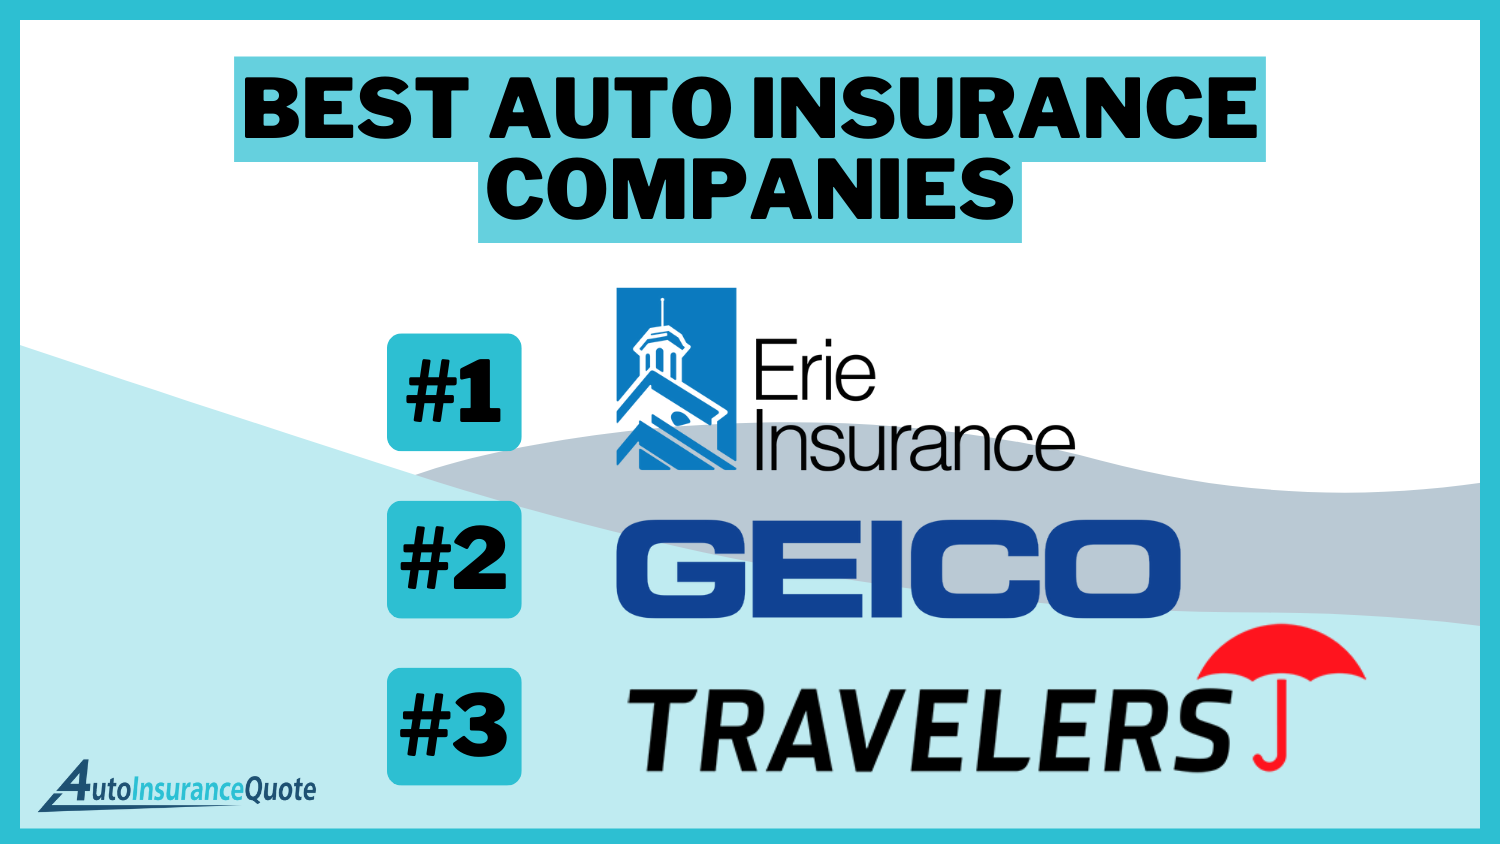 Erie, Geico, and Travelers: Best Auto Insurance Companies